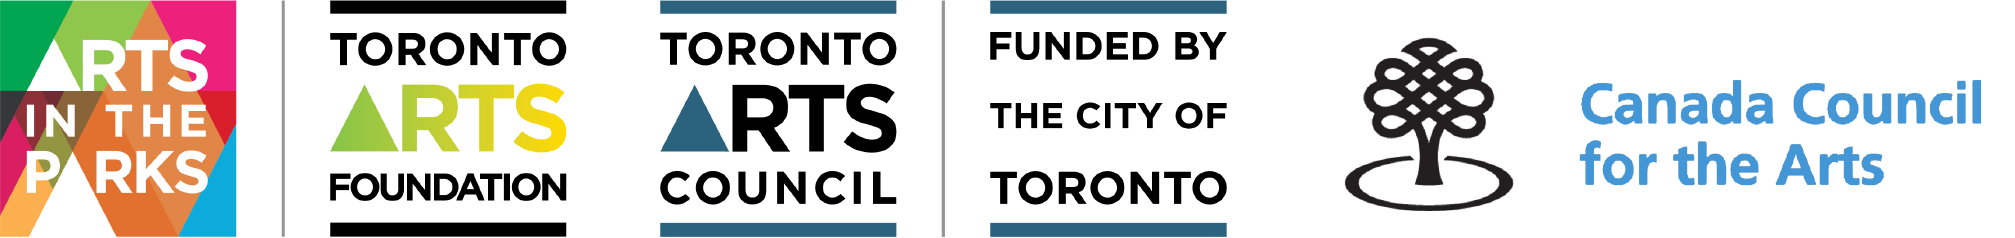 From Weeds We Grow funder and partner logos, including Arts in the Parks, Toronto Arts Foundation, Toronto Arts Council funded by the City of Toronto, and Canada Council for the Arts